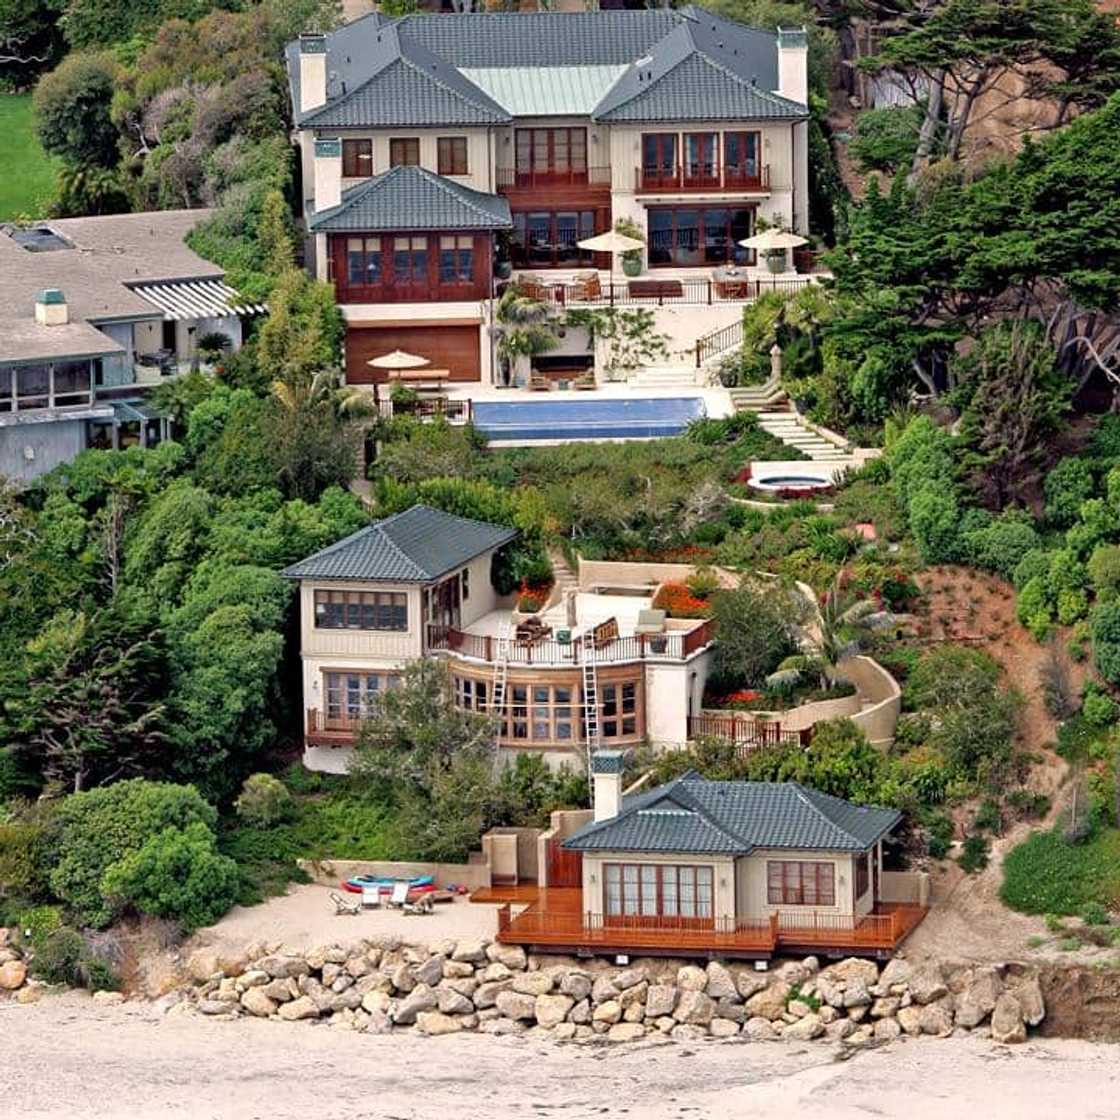 Celeb homes for sale 2019